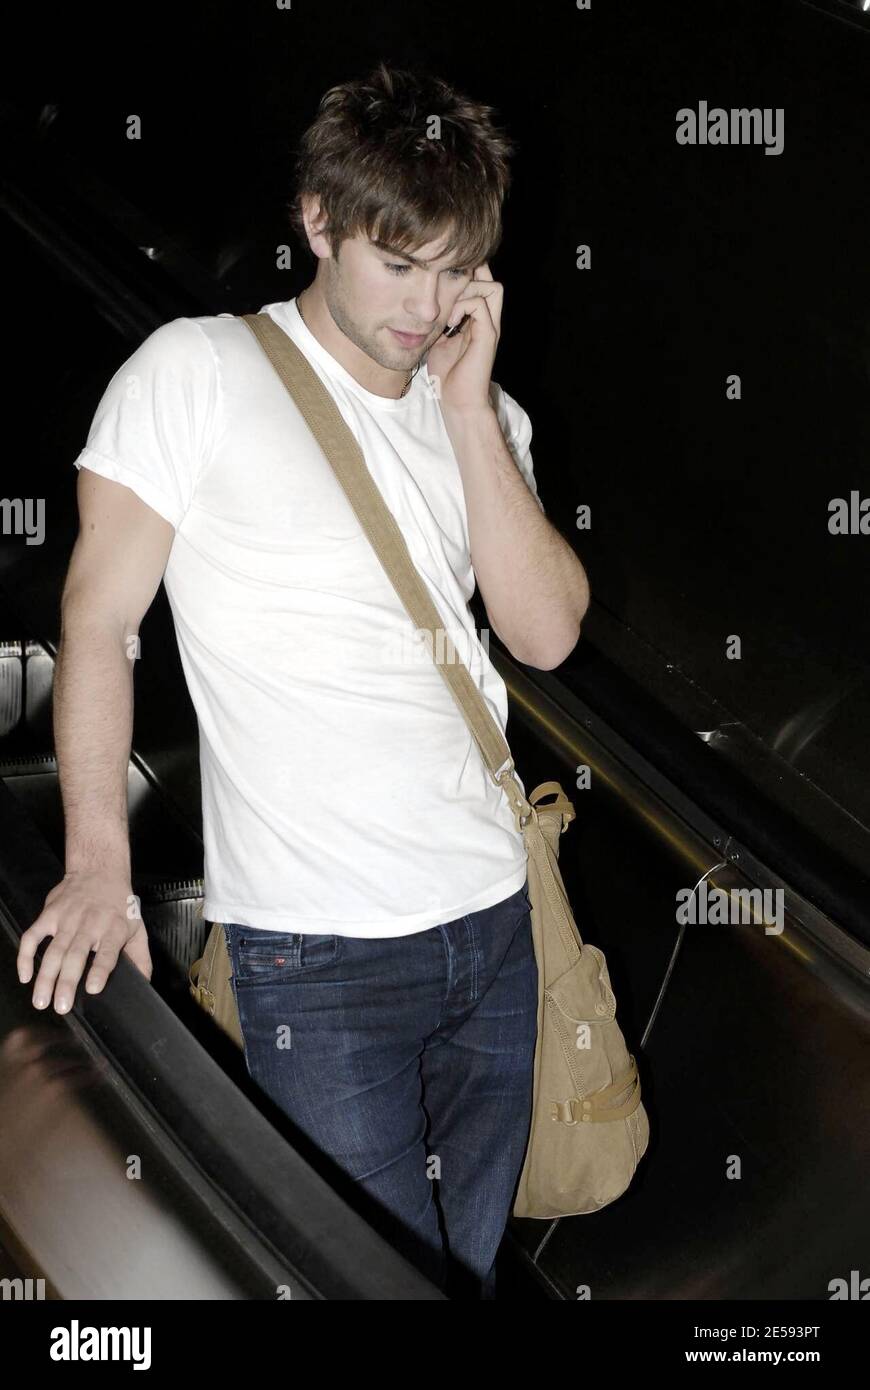 Exclusive!! 'Gossip Girls' star Chace Crawford arrives at Miami International Airport prior to the New Year's holiday without reported girlfriend Carrie Underwood. Miami, FL. 12/29/07.   [[fal]] Stock Photo